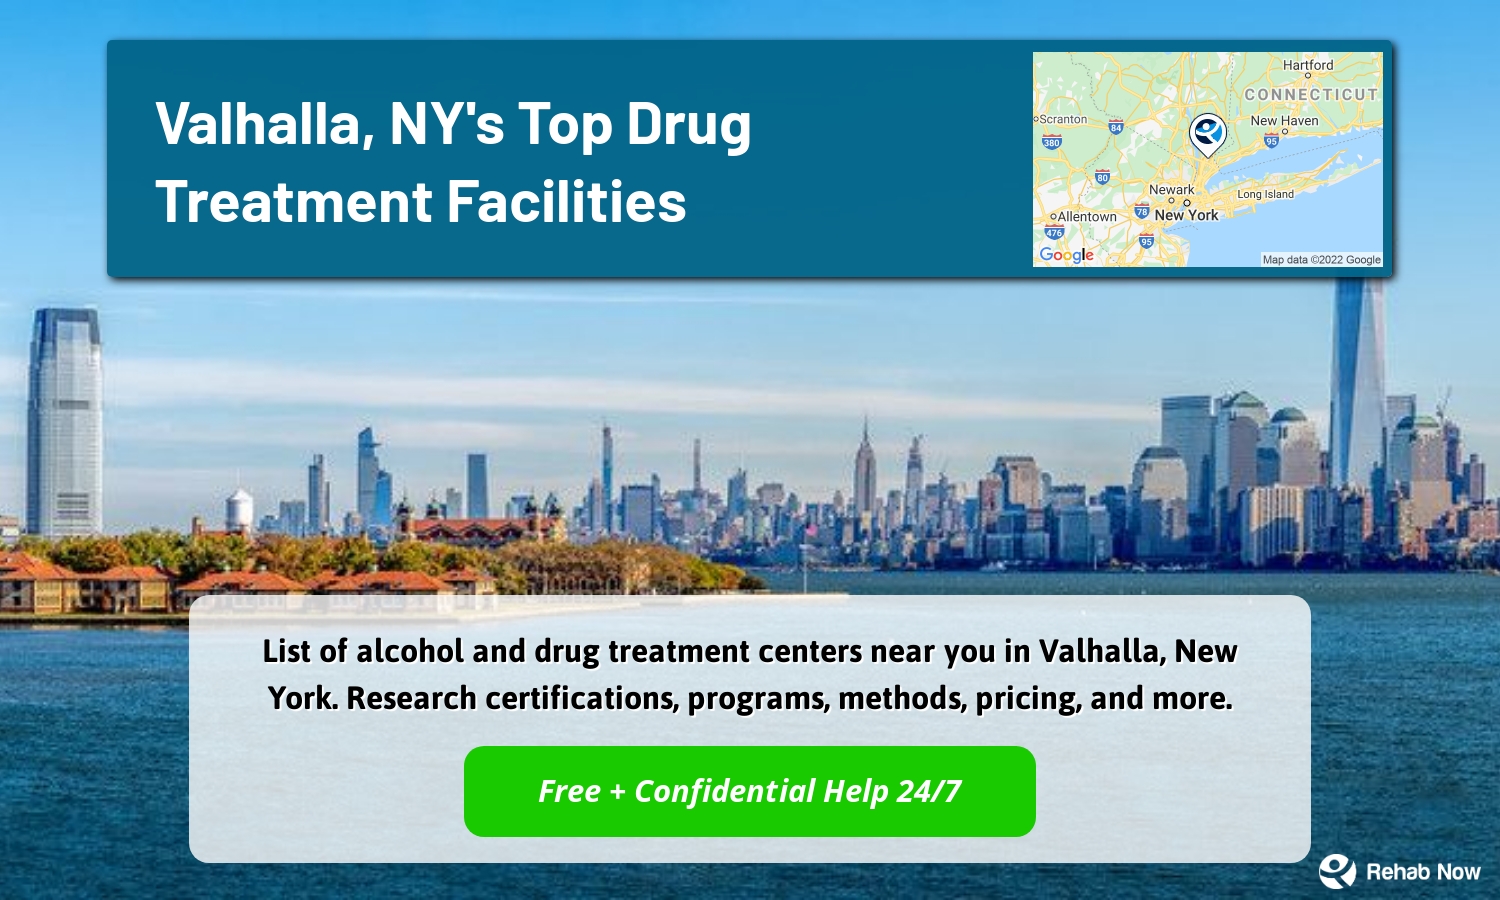 List of alcohol and drug treatment centers near you in Valhalla, New York. Research certifications, programs, methods, pricing, and more.